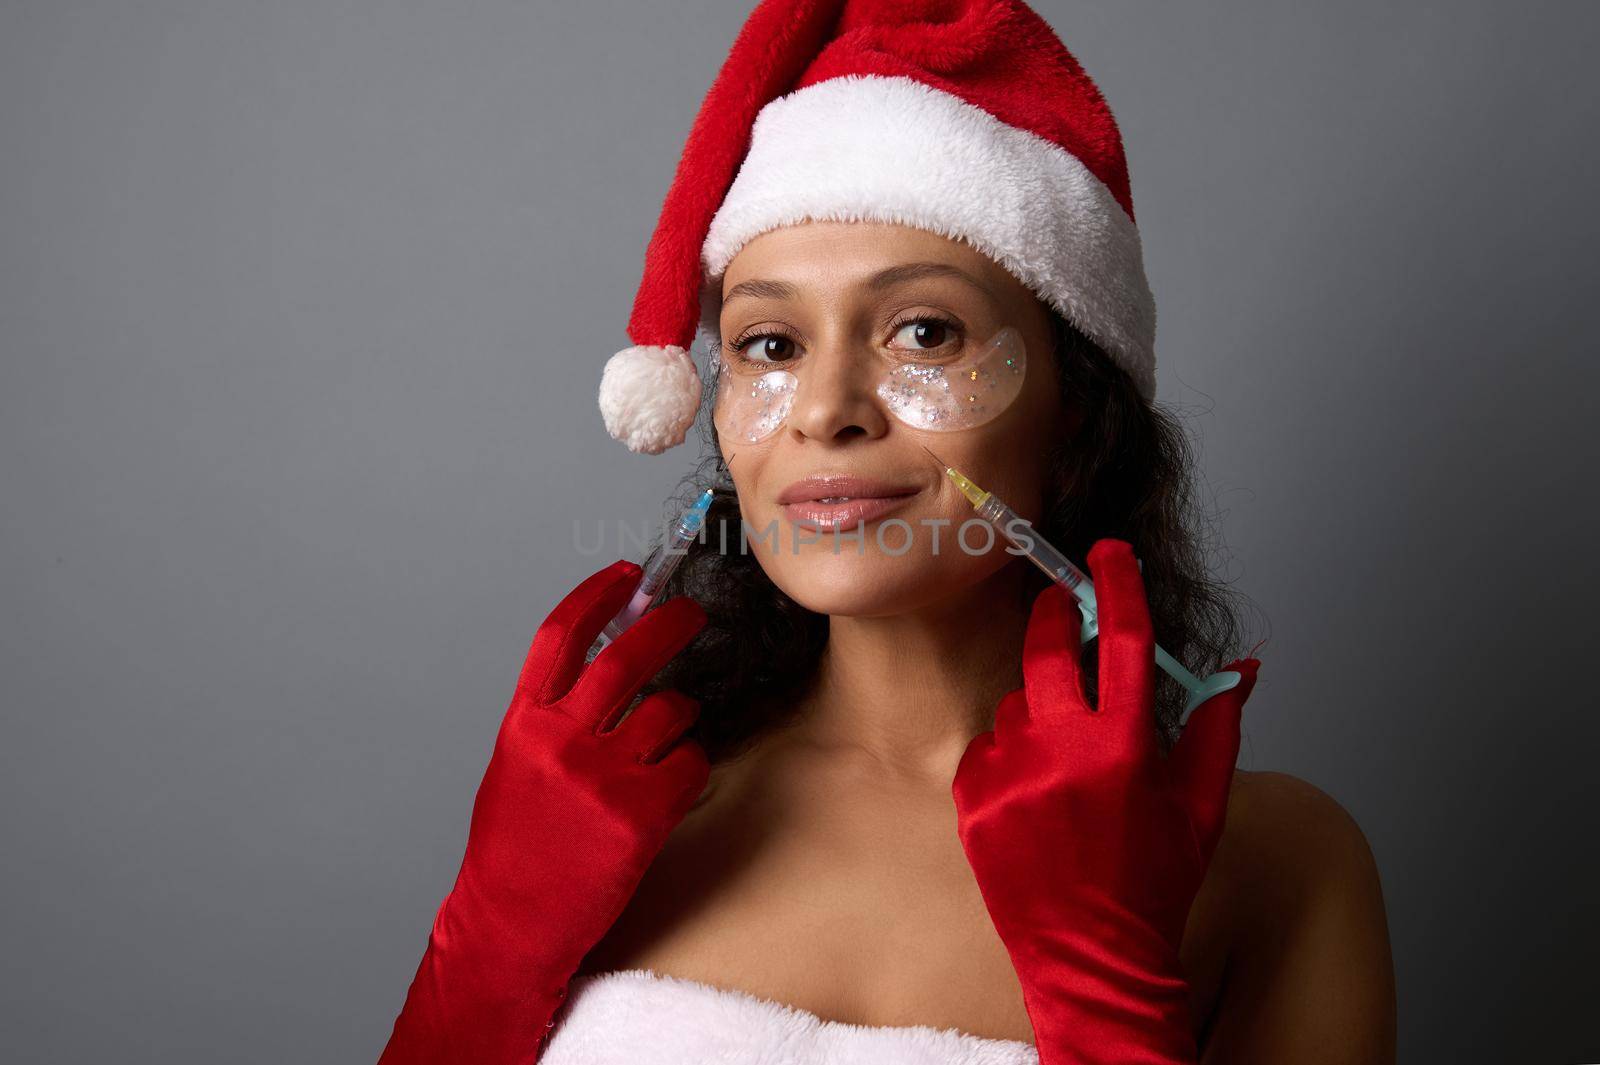 Gorgeous woman dressed in Santa for Christmas holidays, holds syringes near her face, ready for beauty injection on nasolabial folds. Anti-aging, face lifting, rejuvenation, cosmetology concept for ad